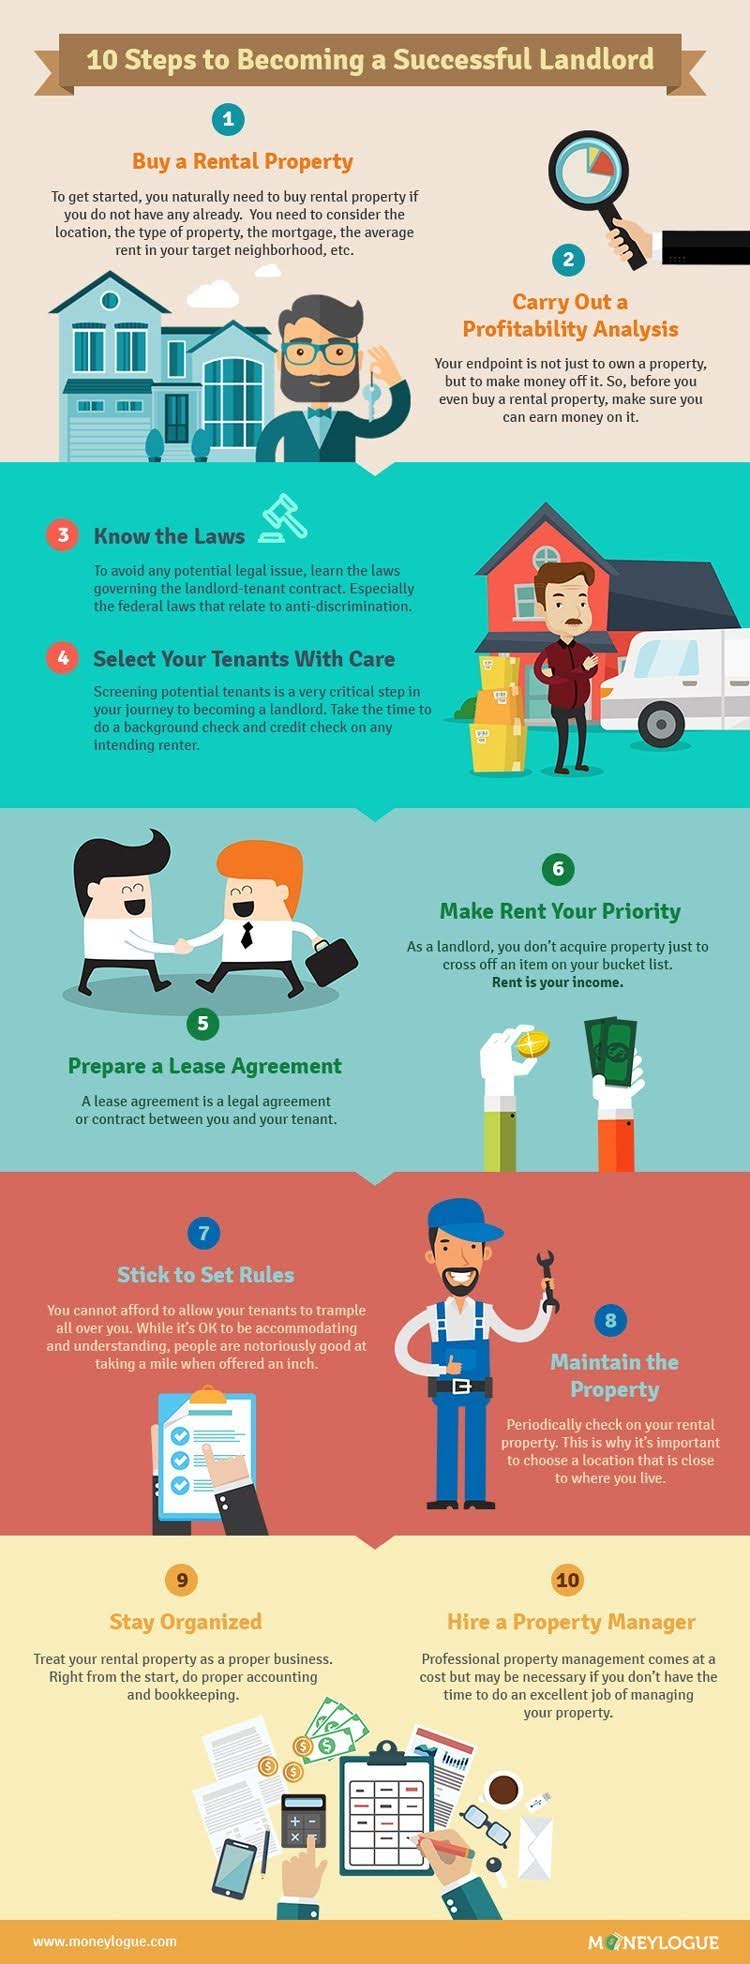 How To Become A Landlord #infographic 